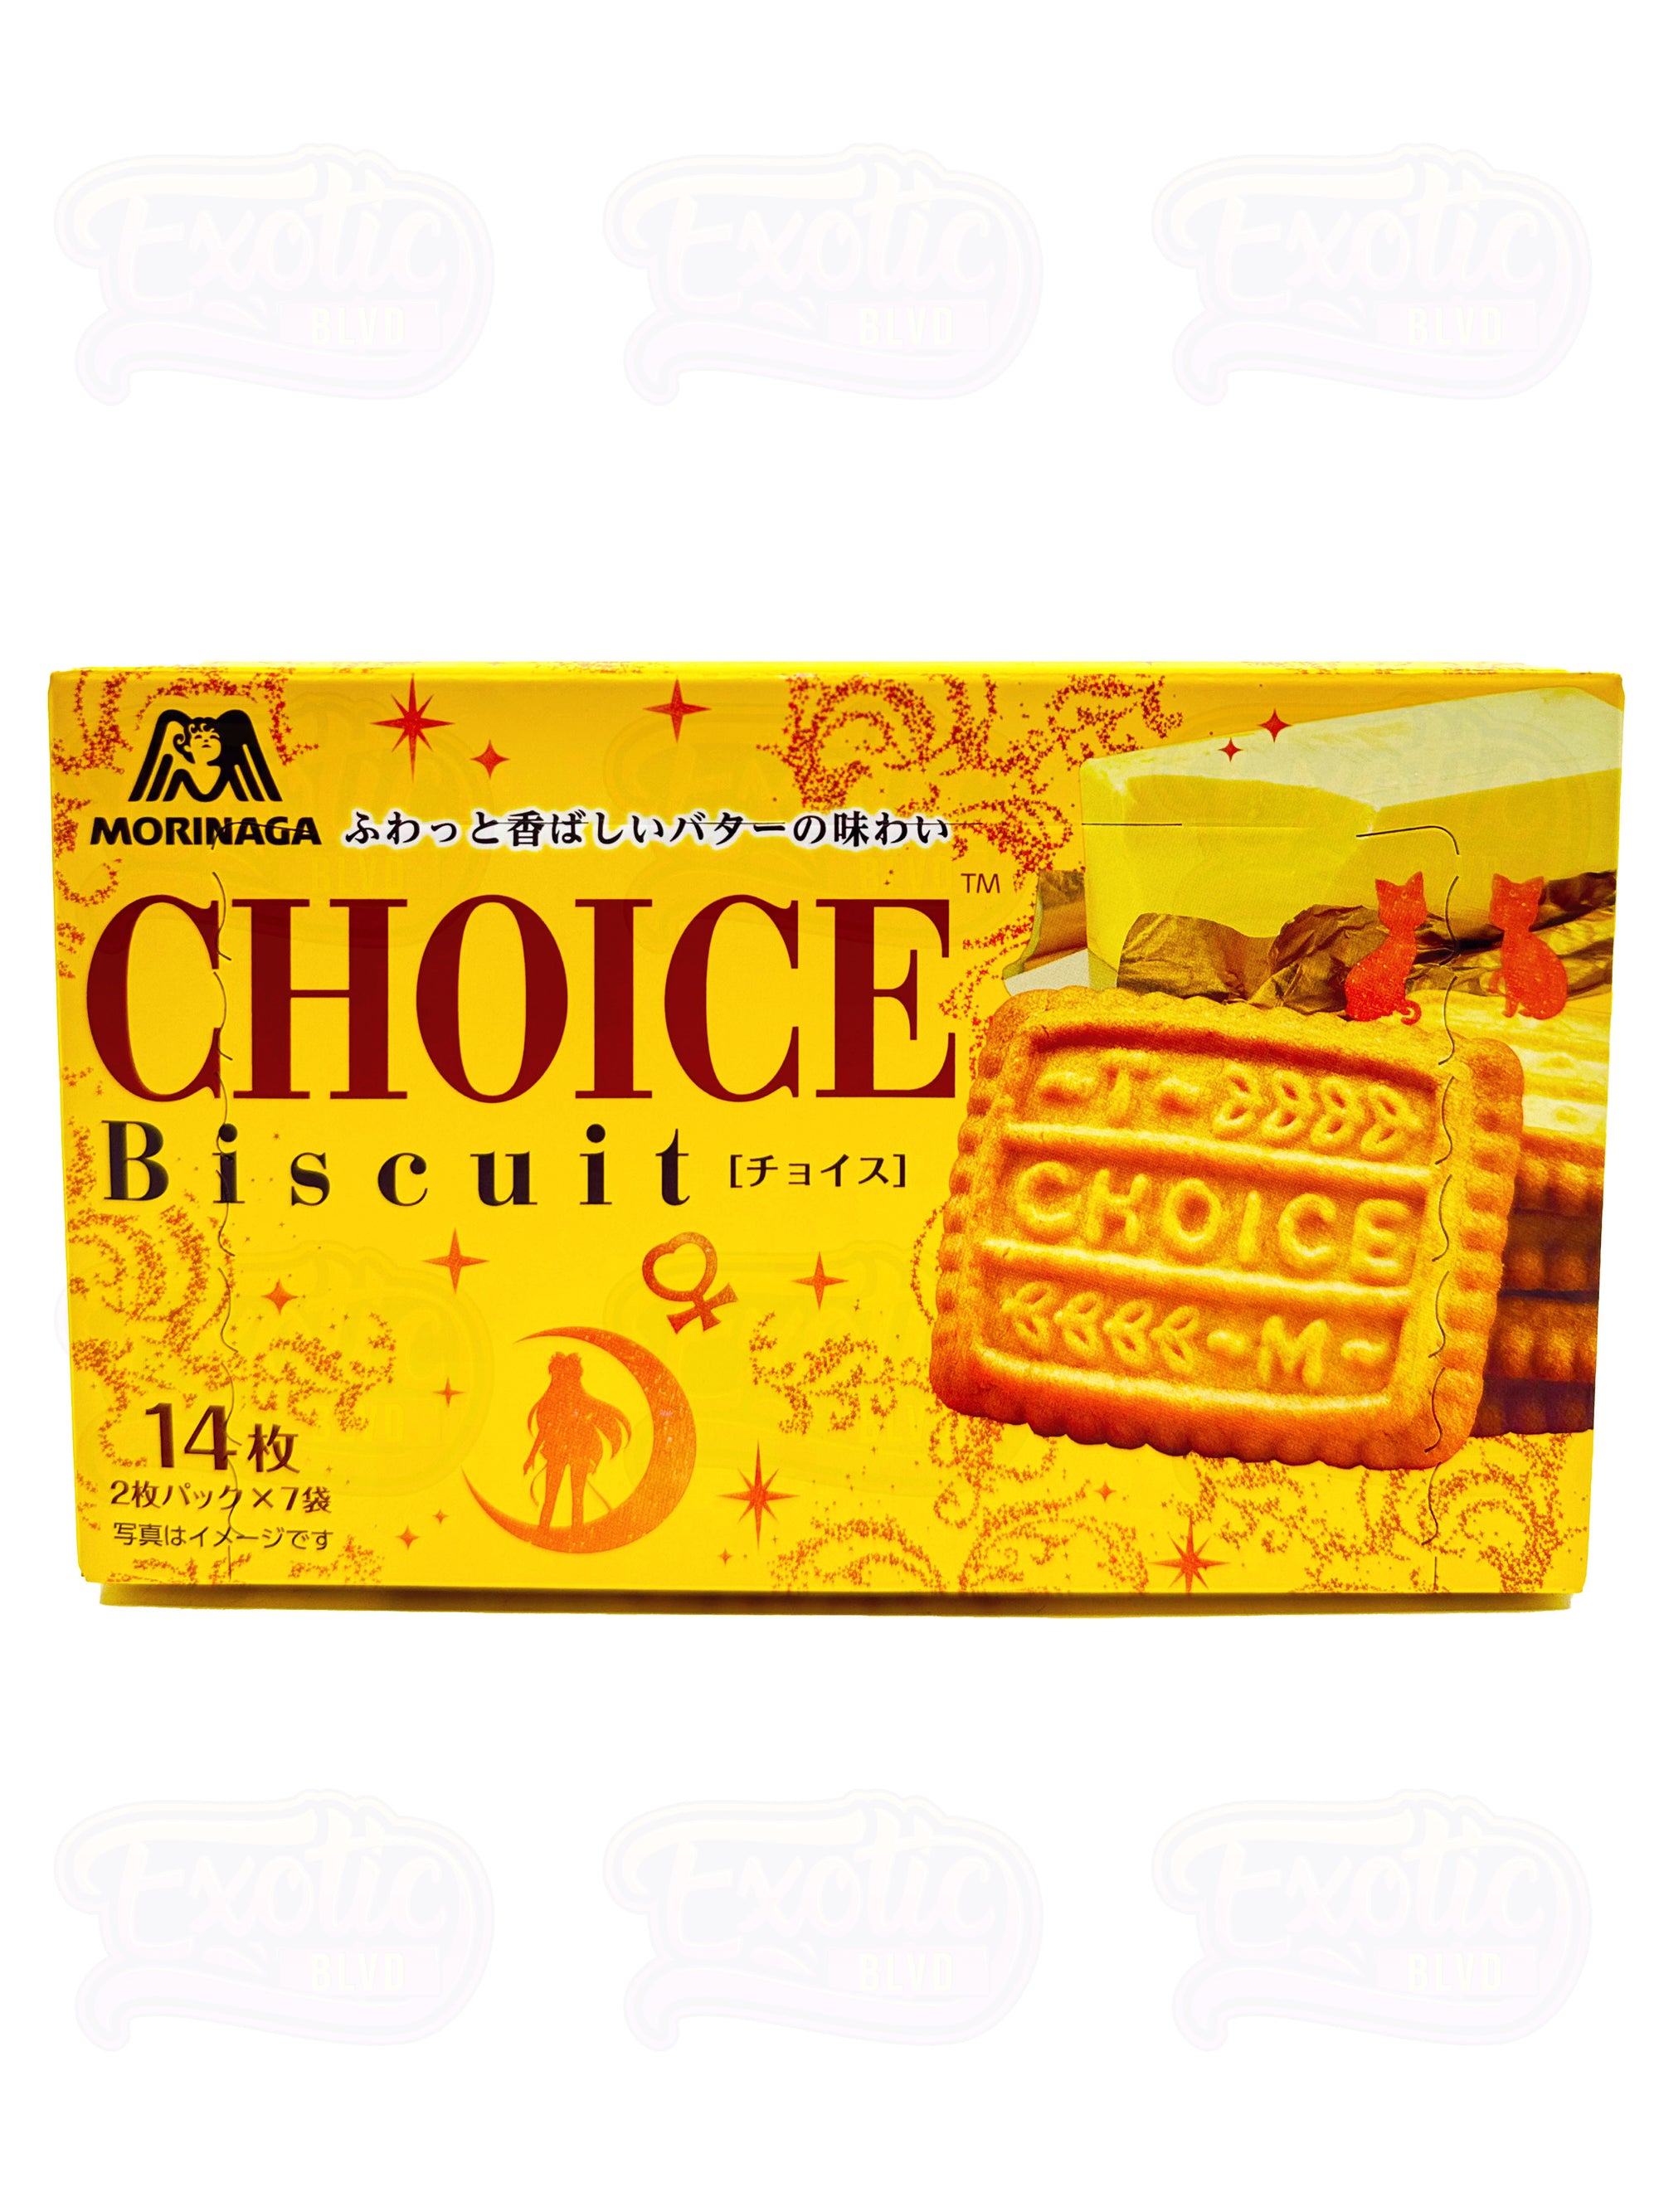 Morinaga Butter Biscuits